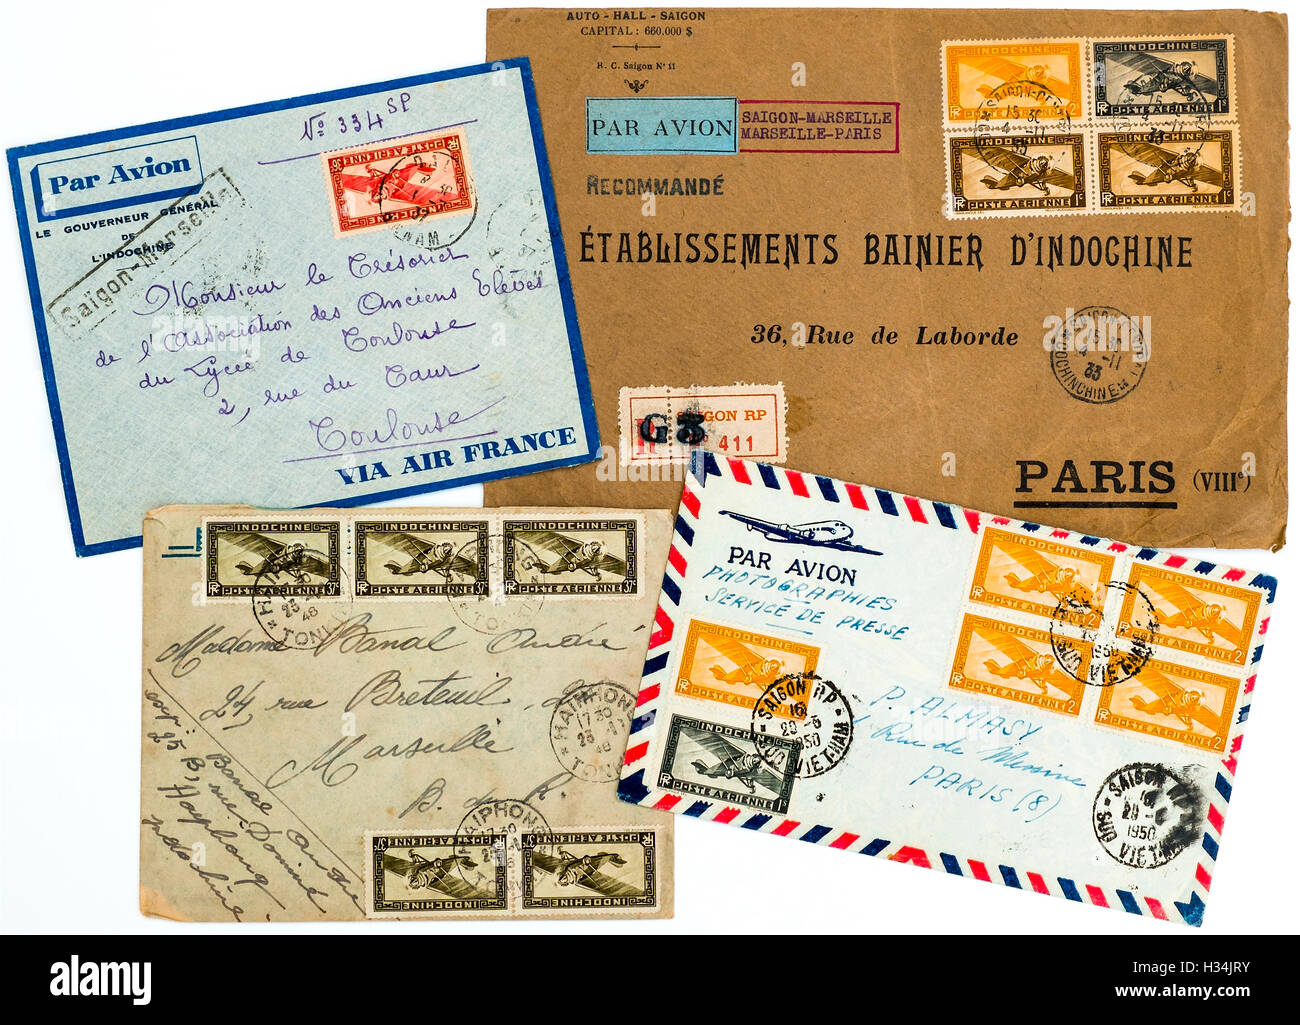 Air Mail & Letter Writing – Edelweiss Post